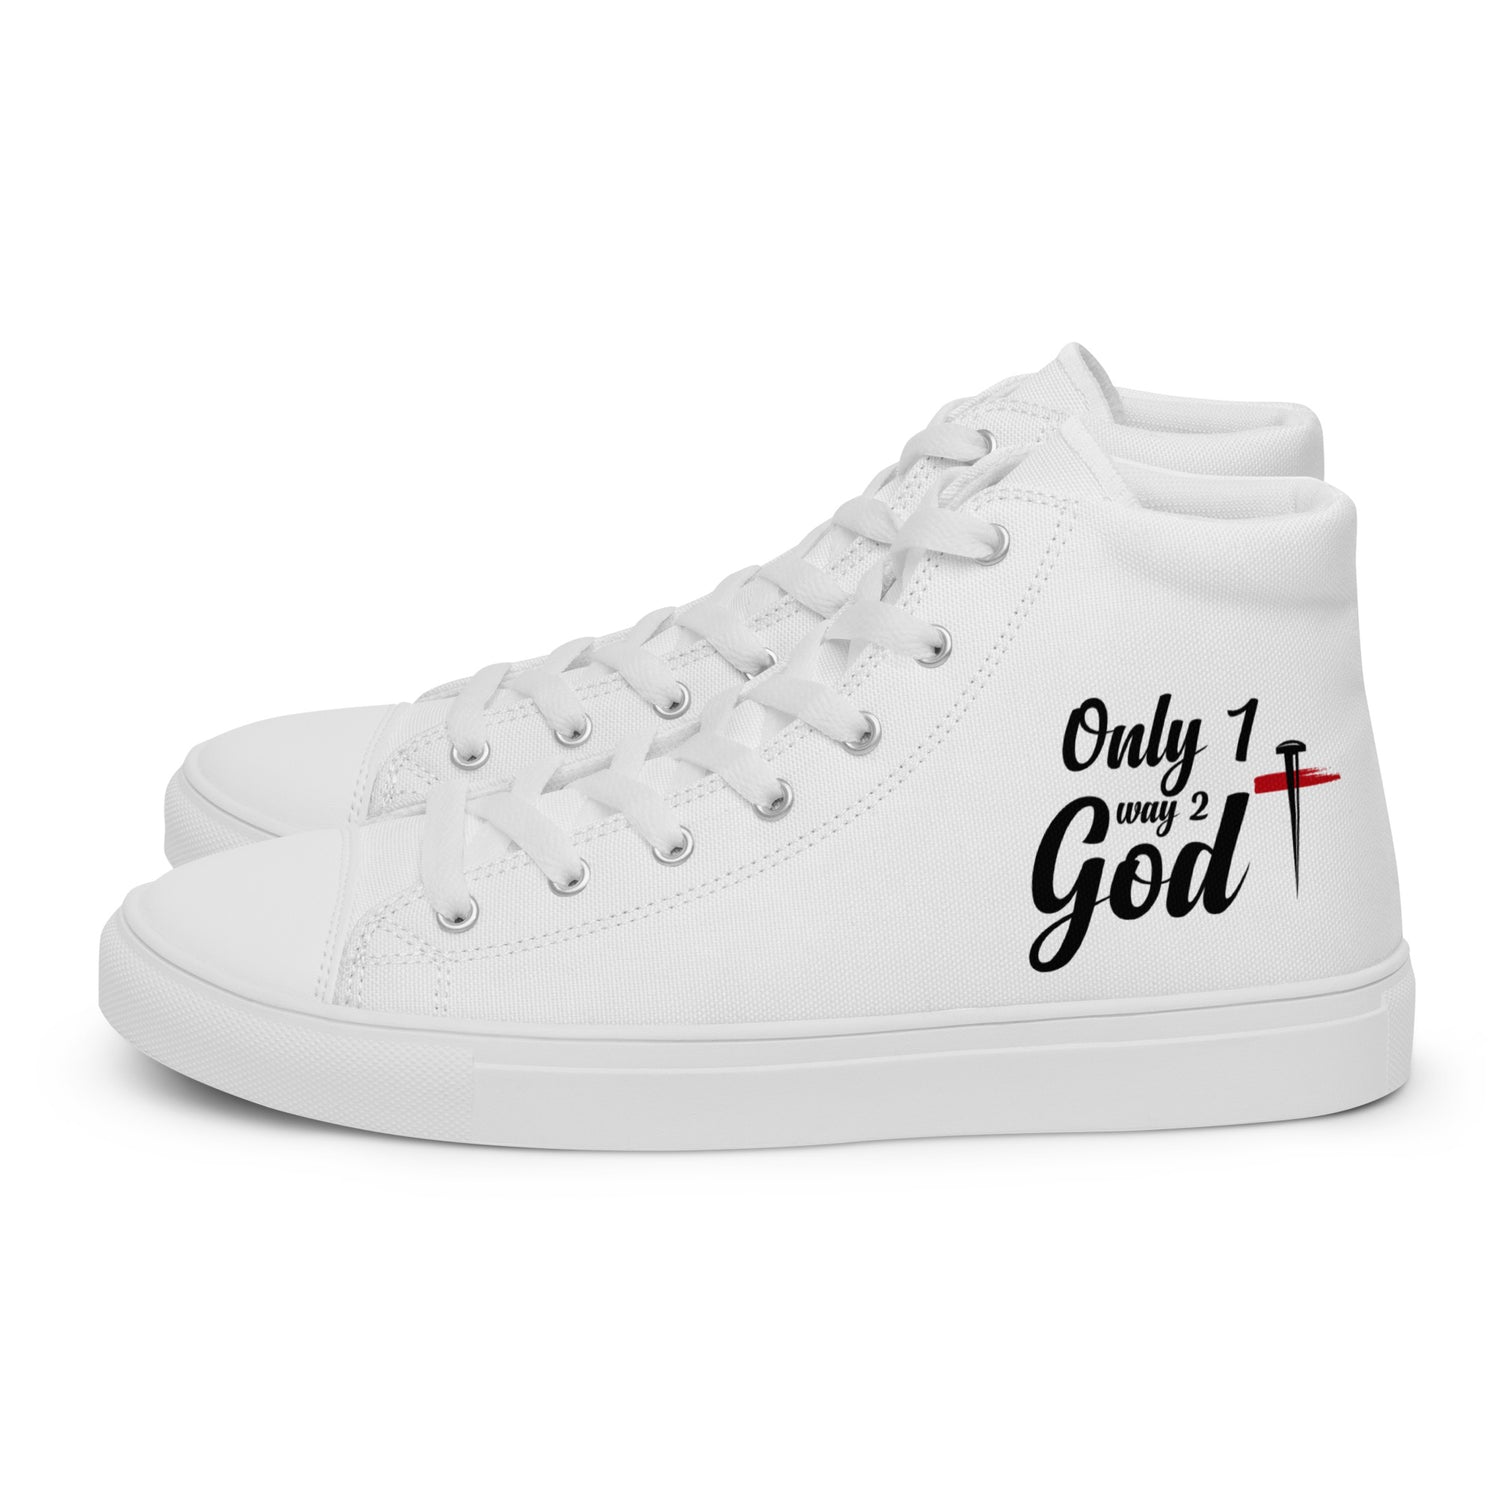 ONLY 1 WAY 2 GOD WOMENS SHOES